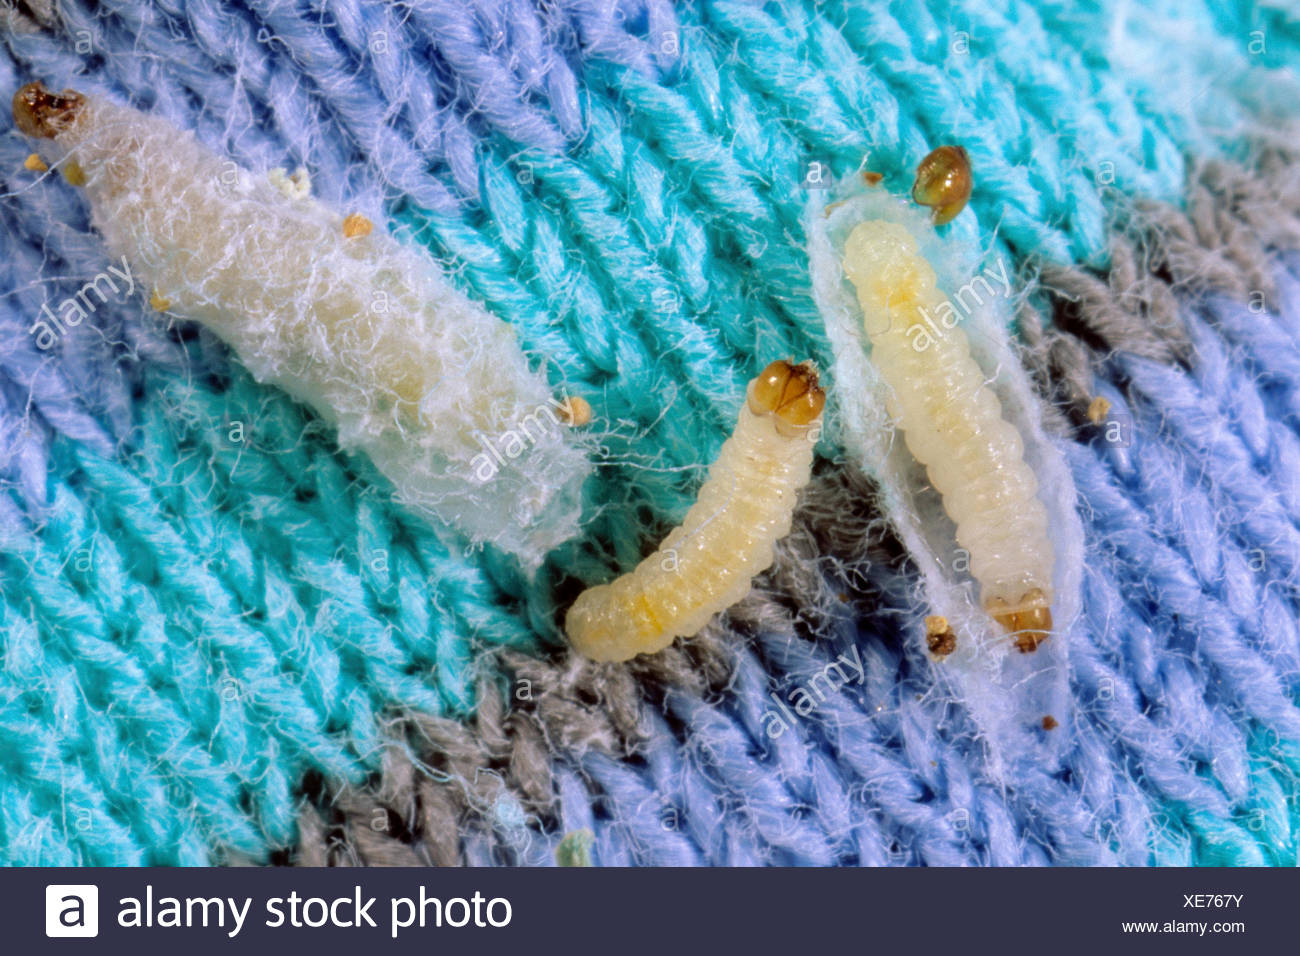 Clothes Moth High Resolution Stock Photography and Images - Alamy